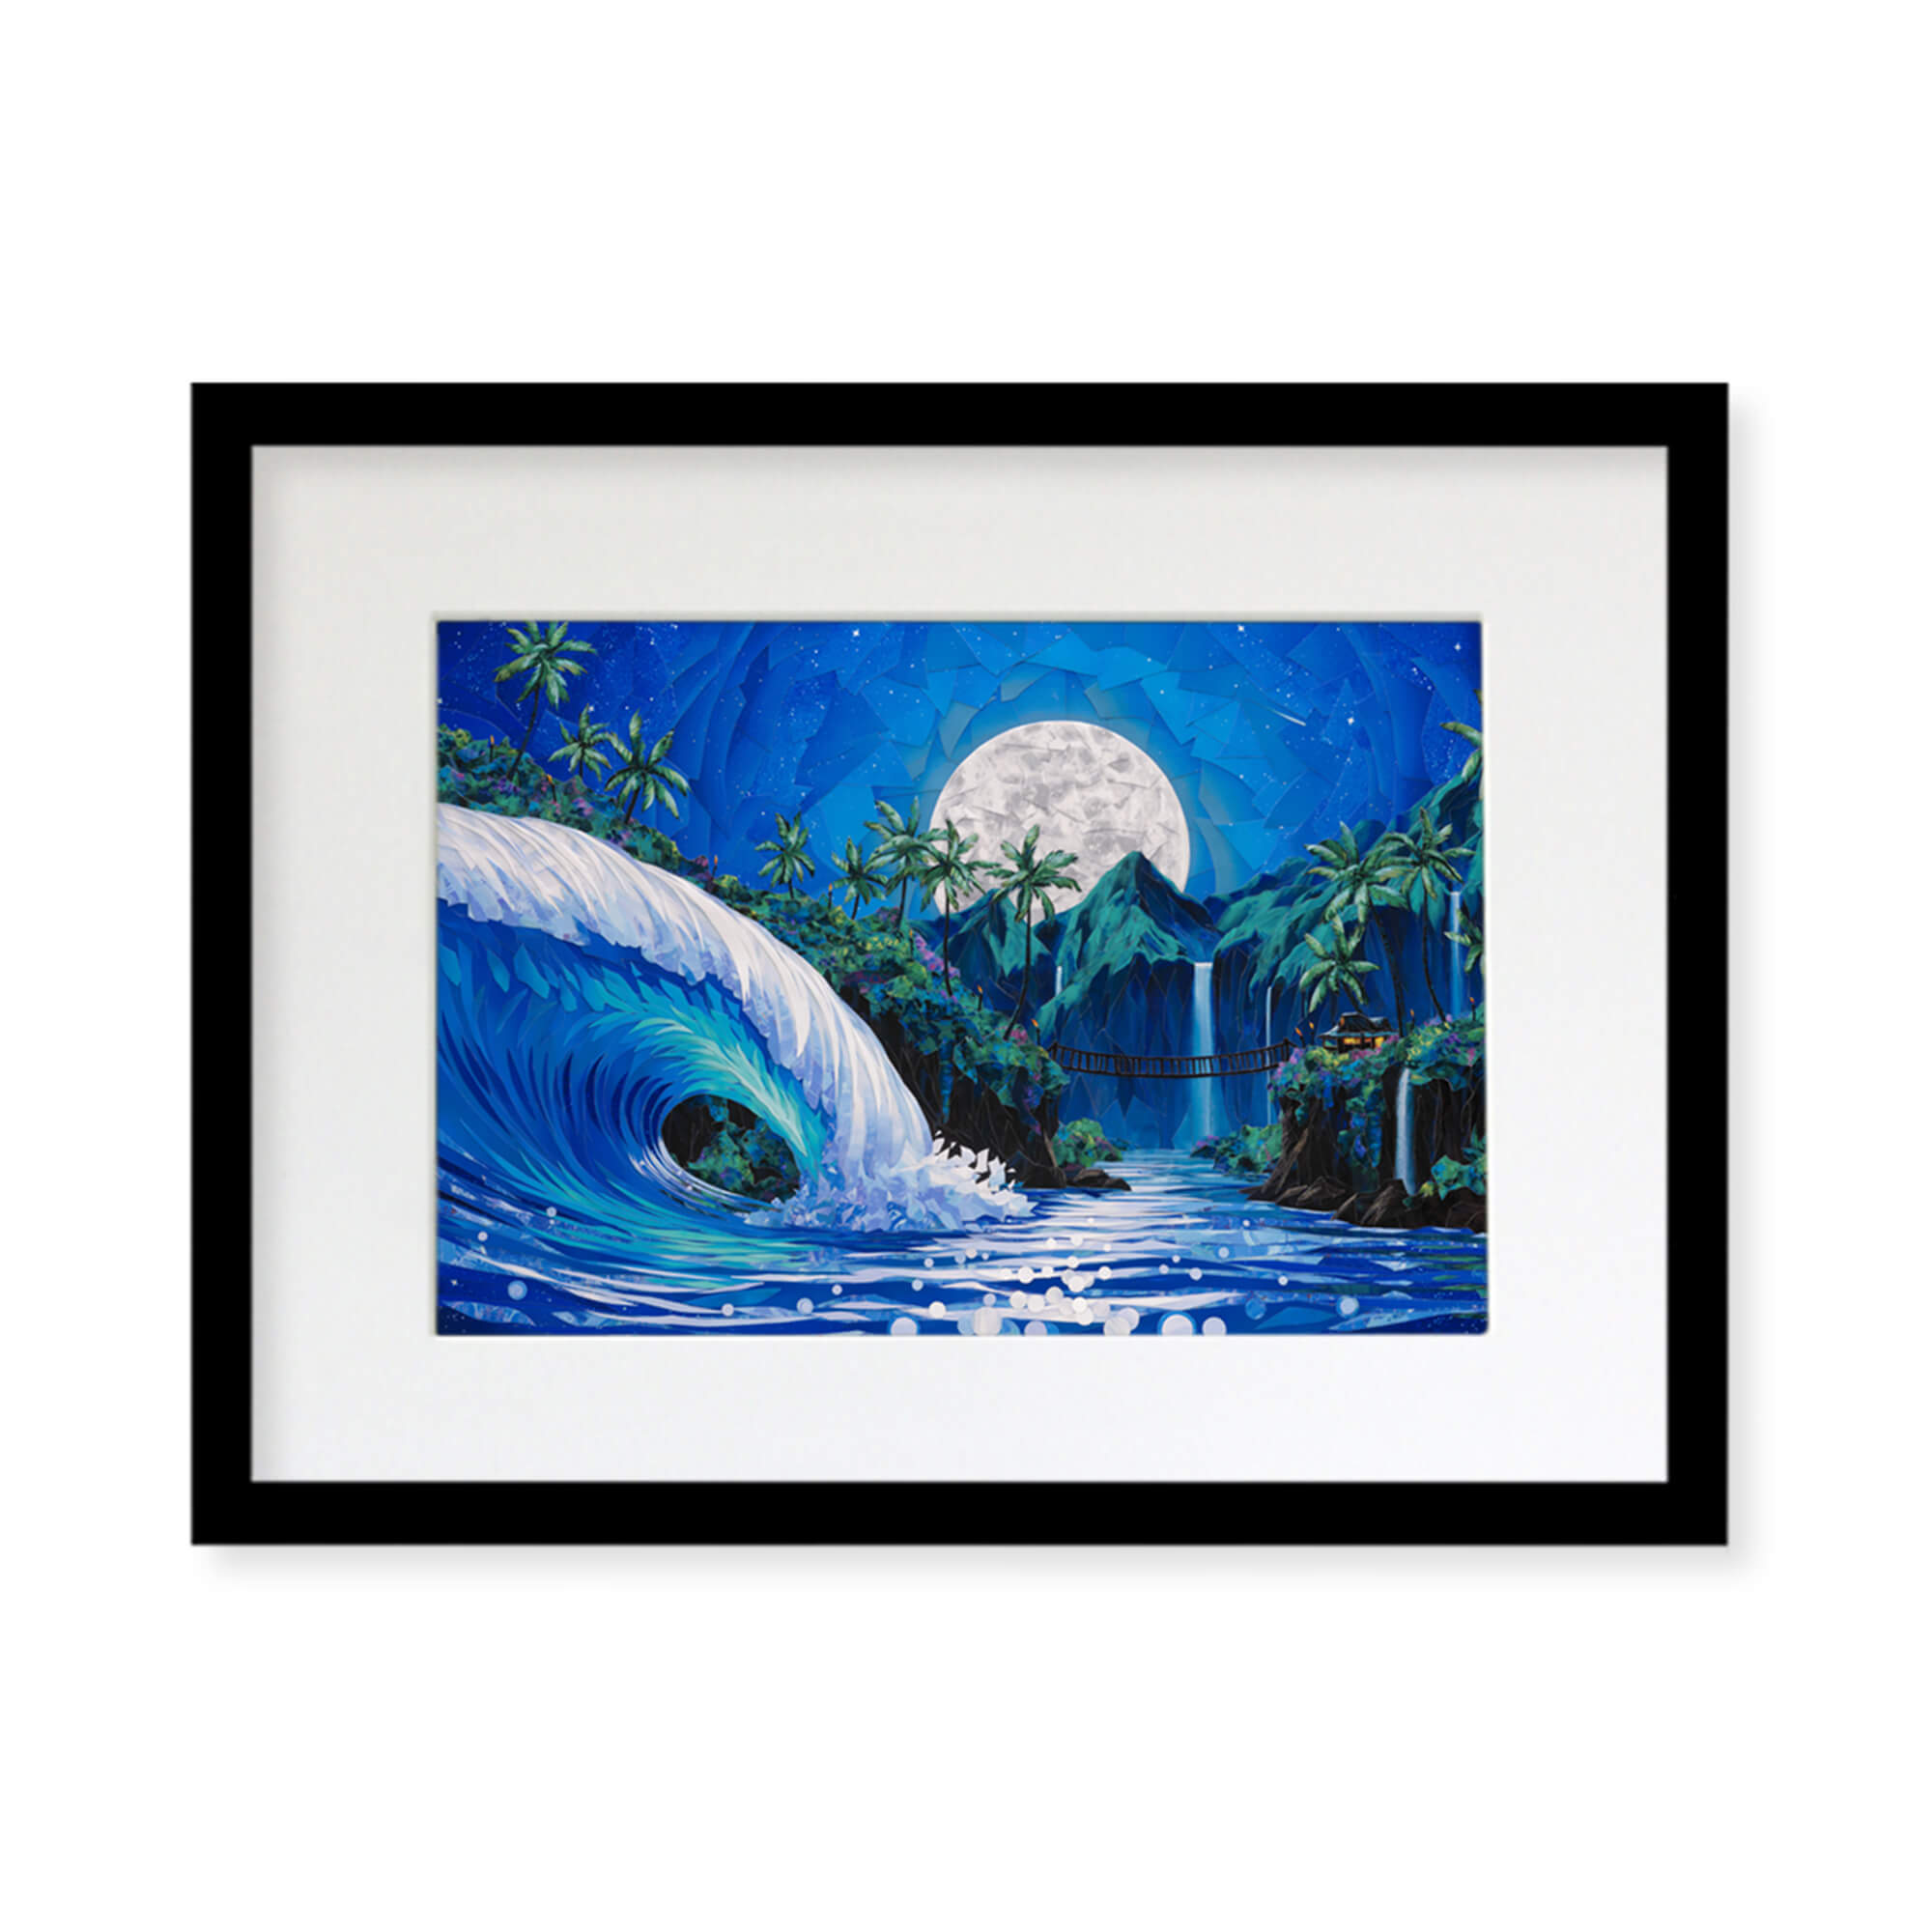 A framed matted art print featuring a collage of an evening view of a tropical landscape with a huge rolling wave, several waterfalls, and a full moon background by Hawaii artist Patrick Parker